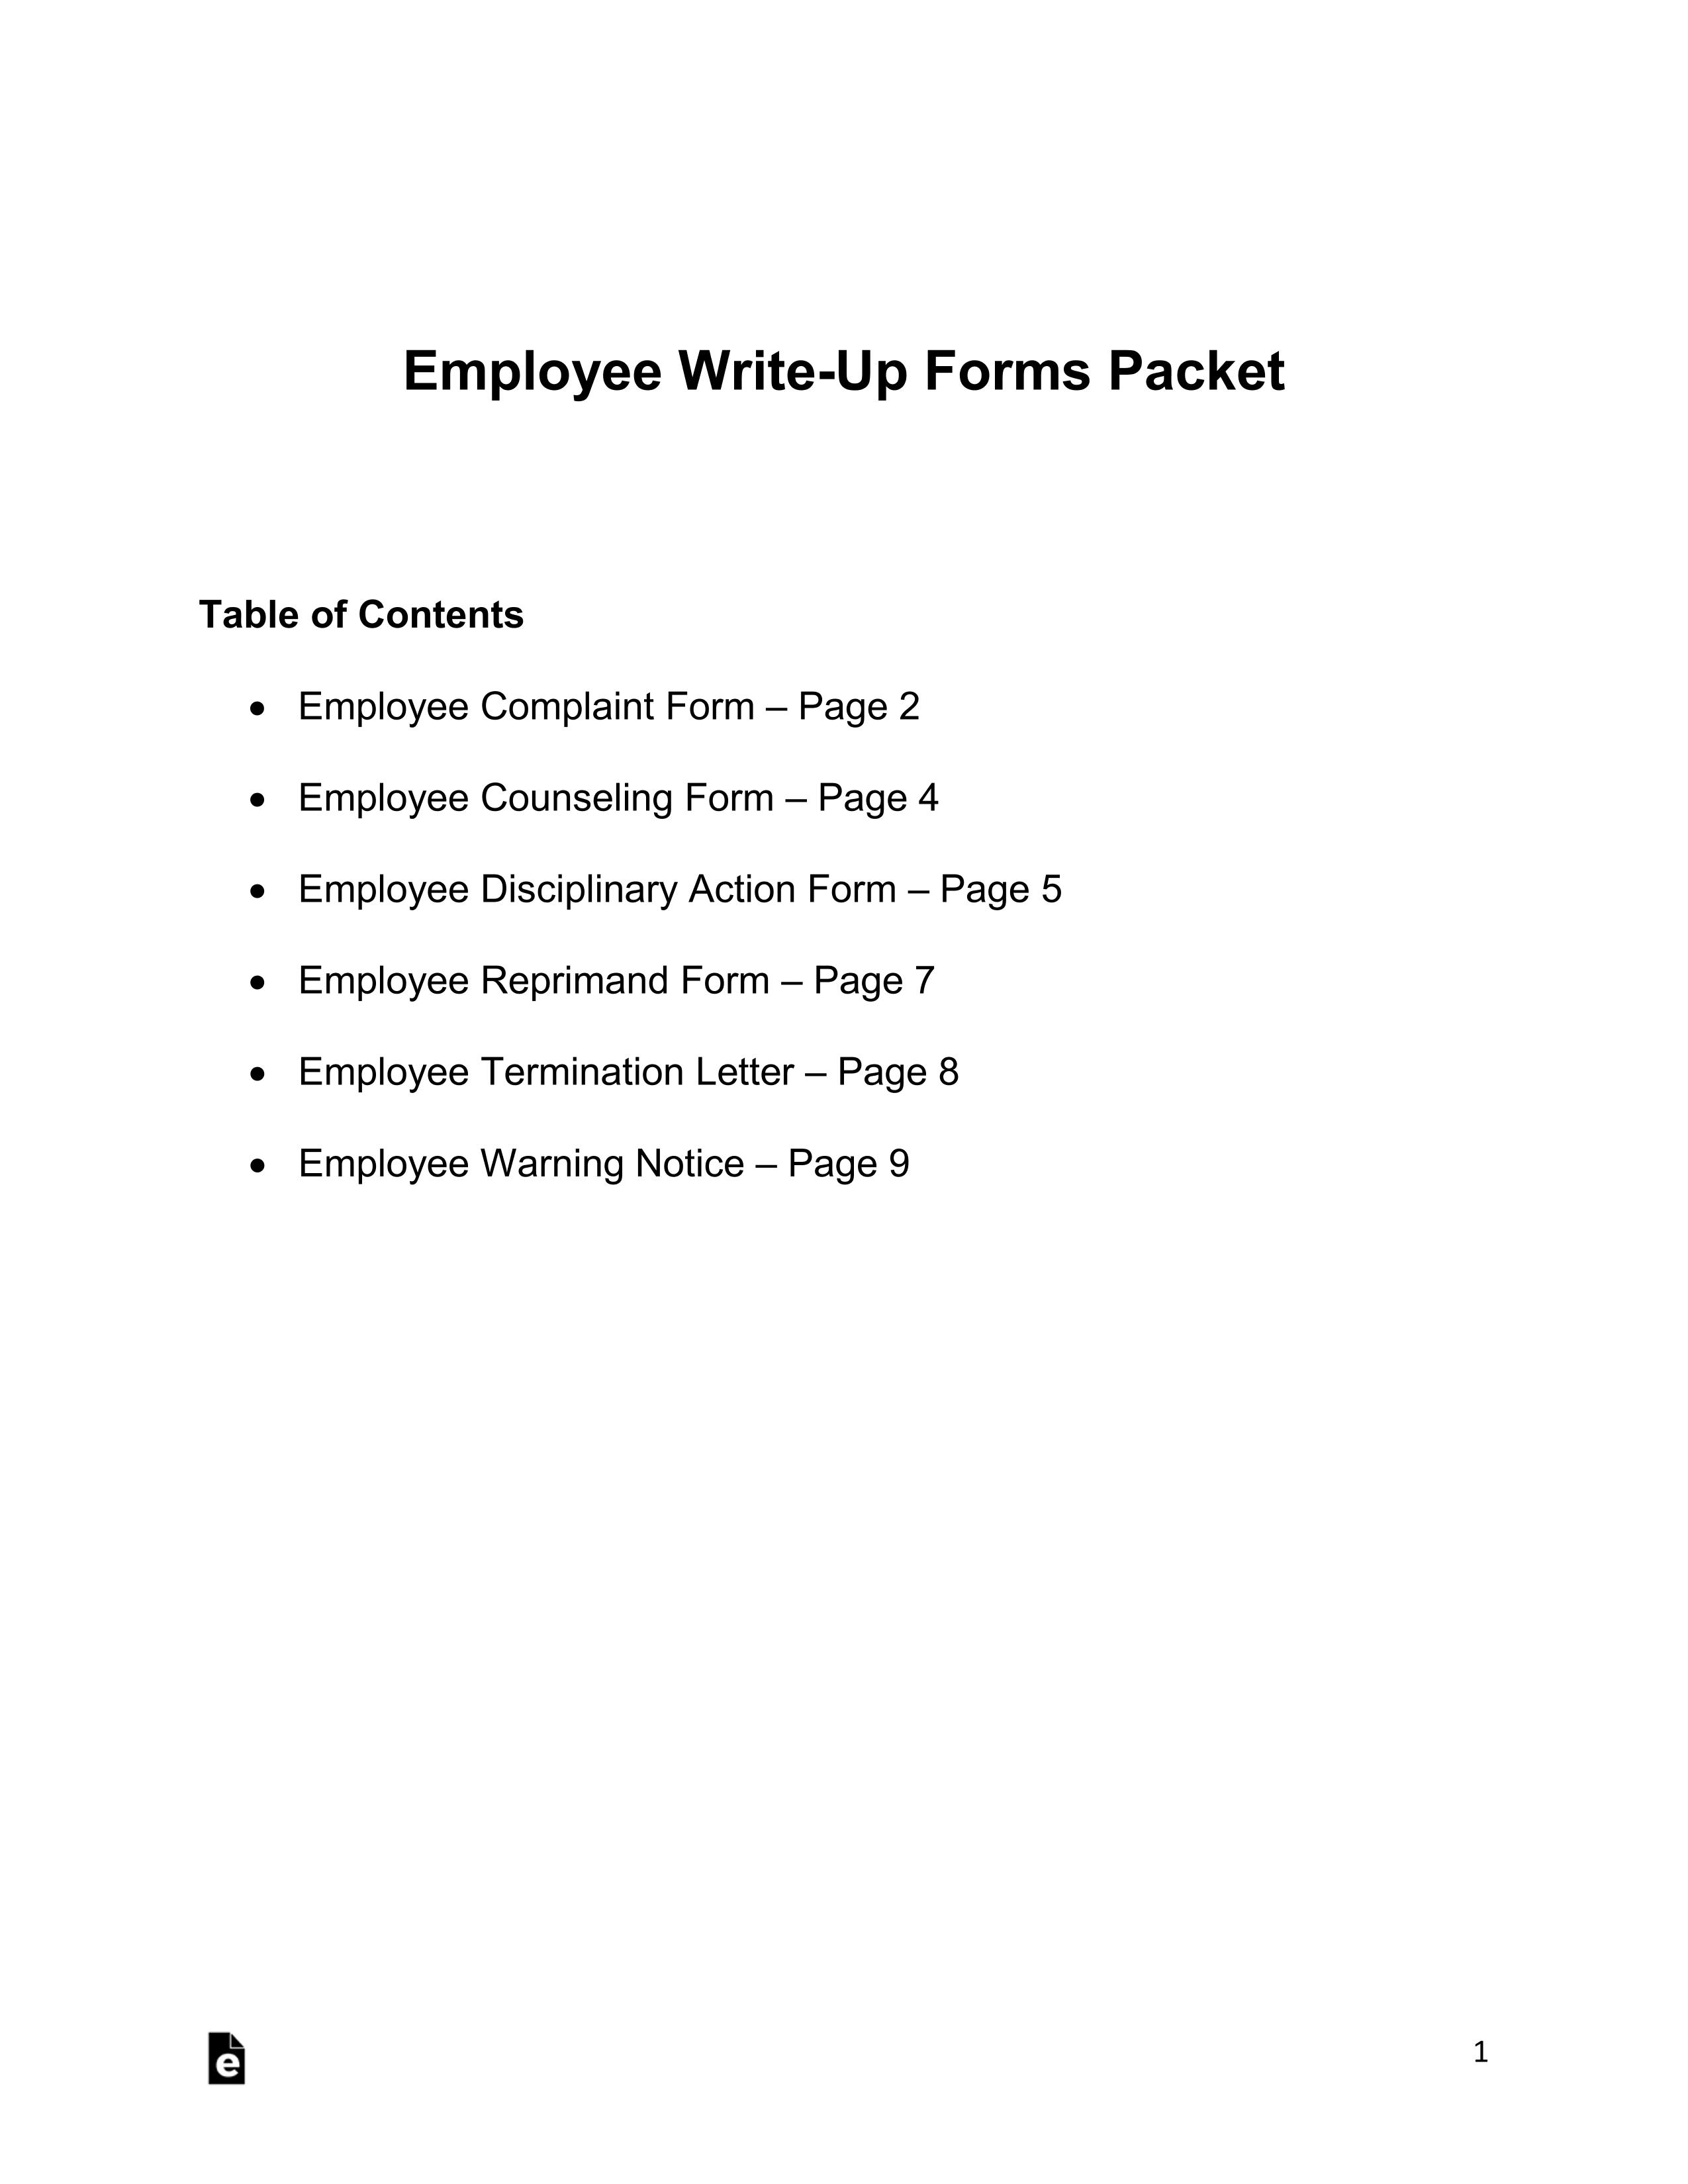 Employee Write-up Form